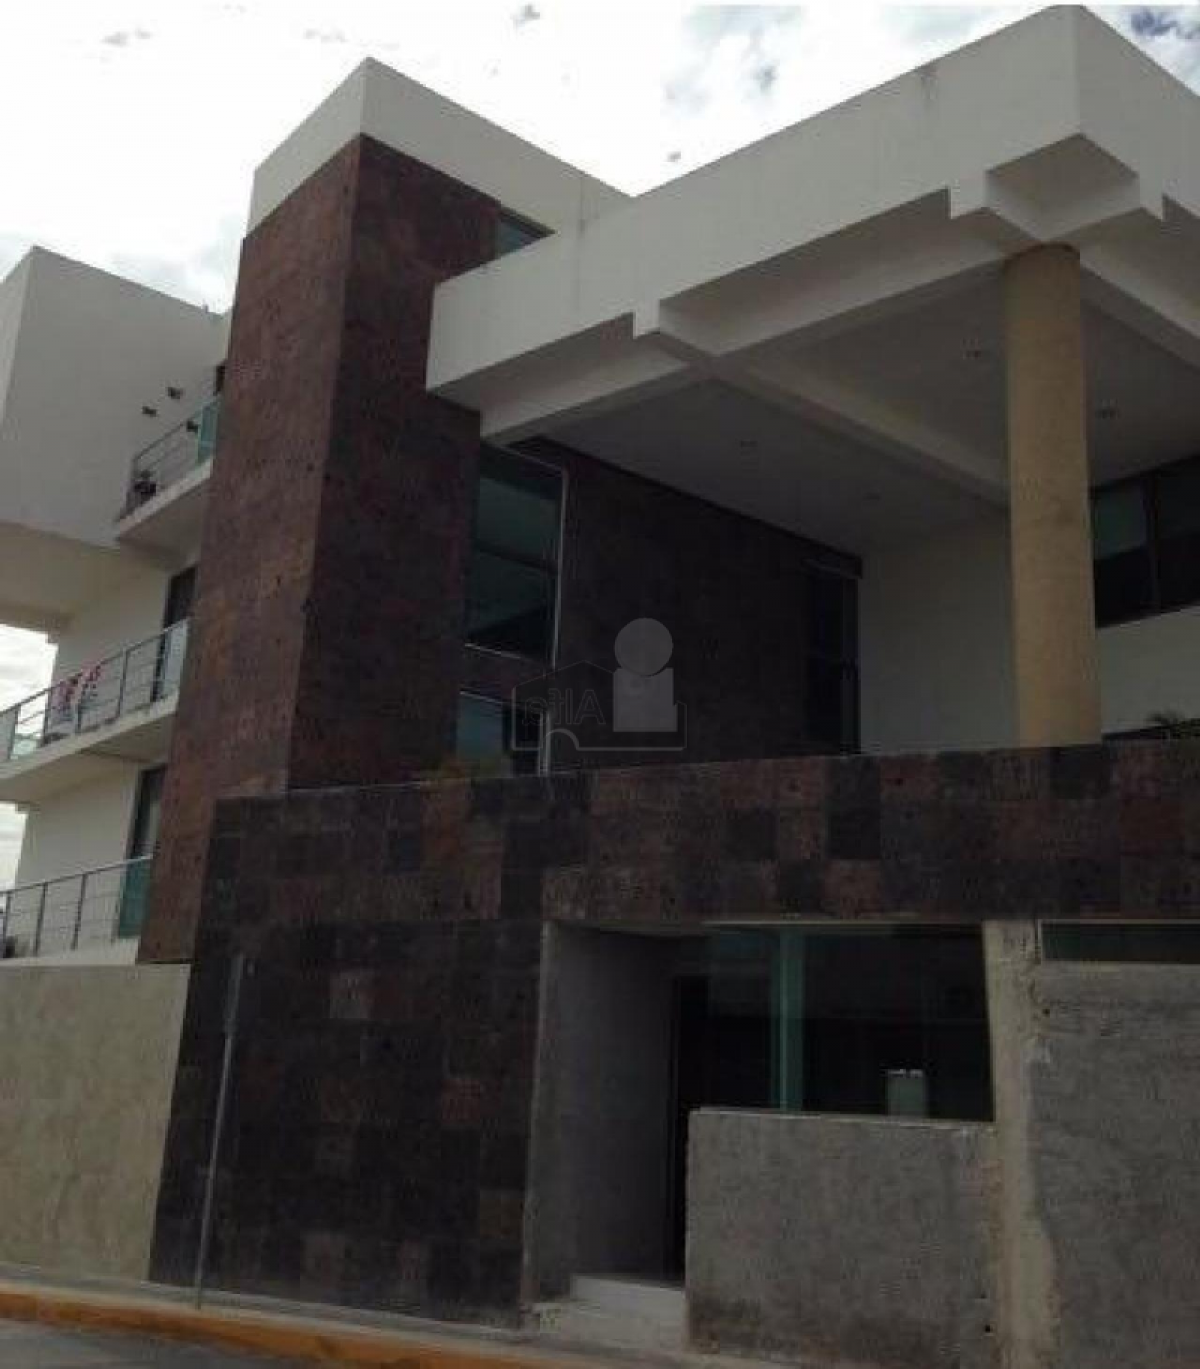 Picture of Apartment For Sale in Campeche, Campeche, Mexico